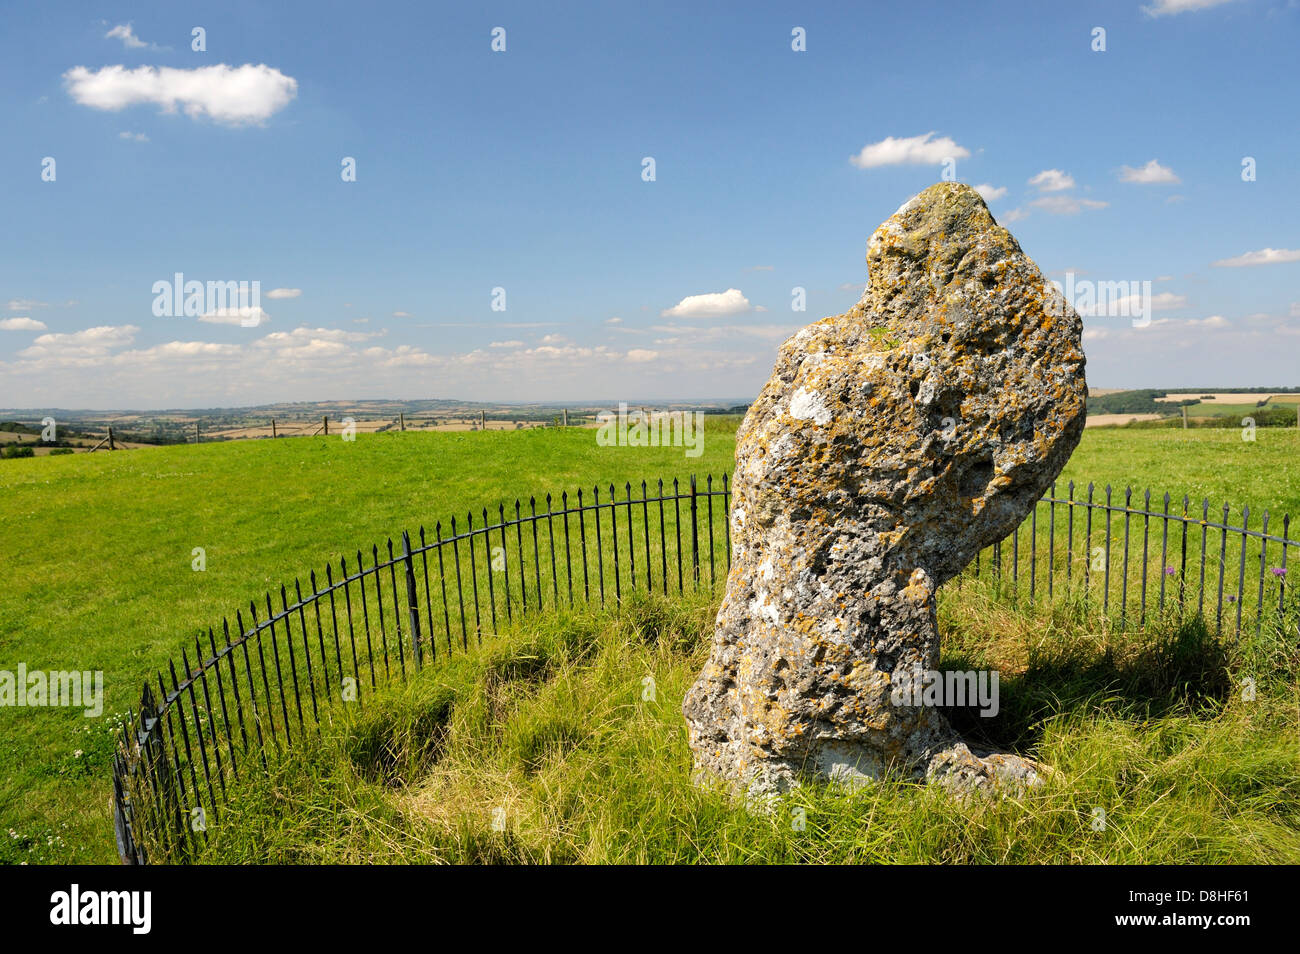 The prehistoric King’s Stone thought to be Bronze Age grave marker. An outlier of the Rollright Stones, Oxfordshire, England Stock Photo